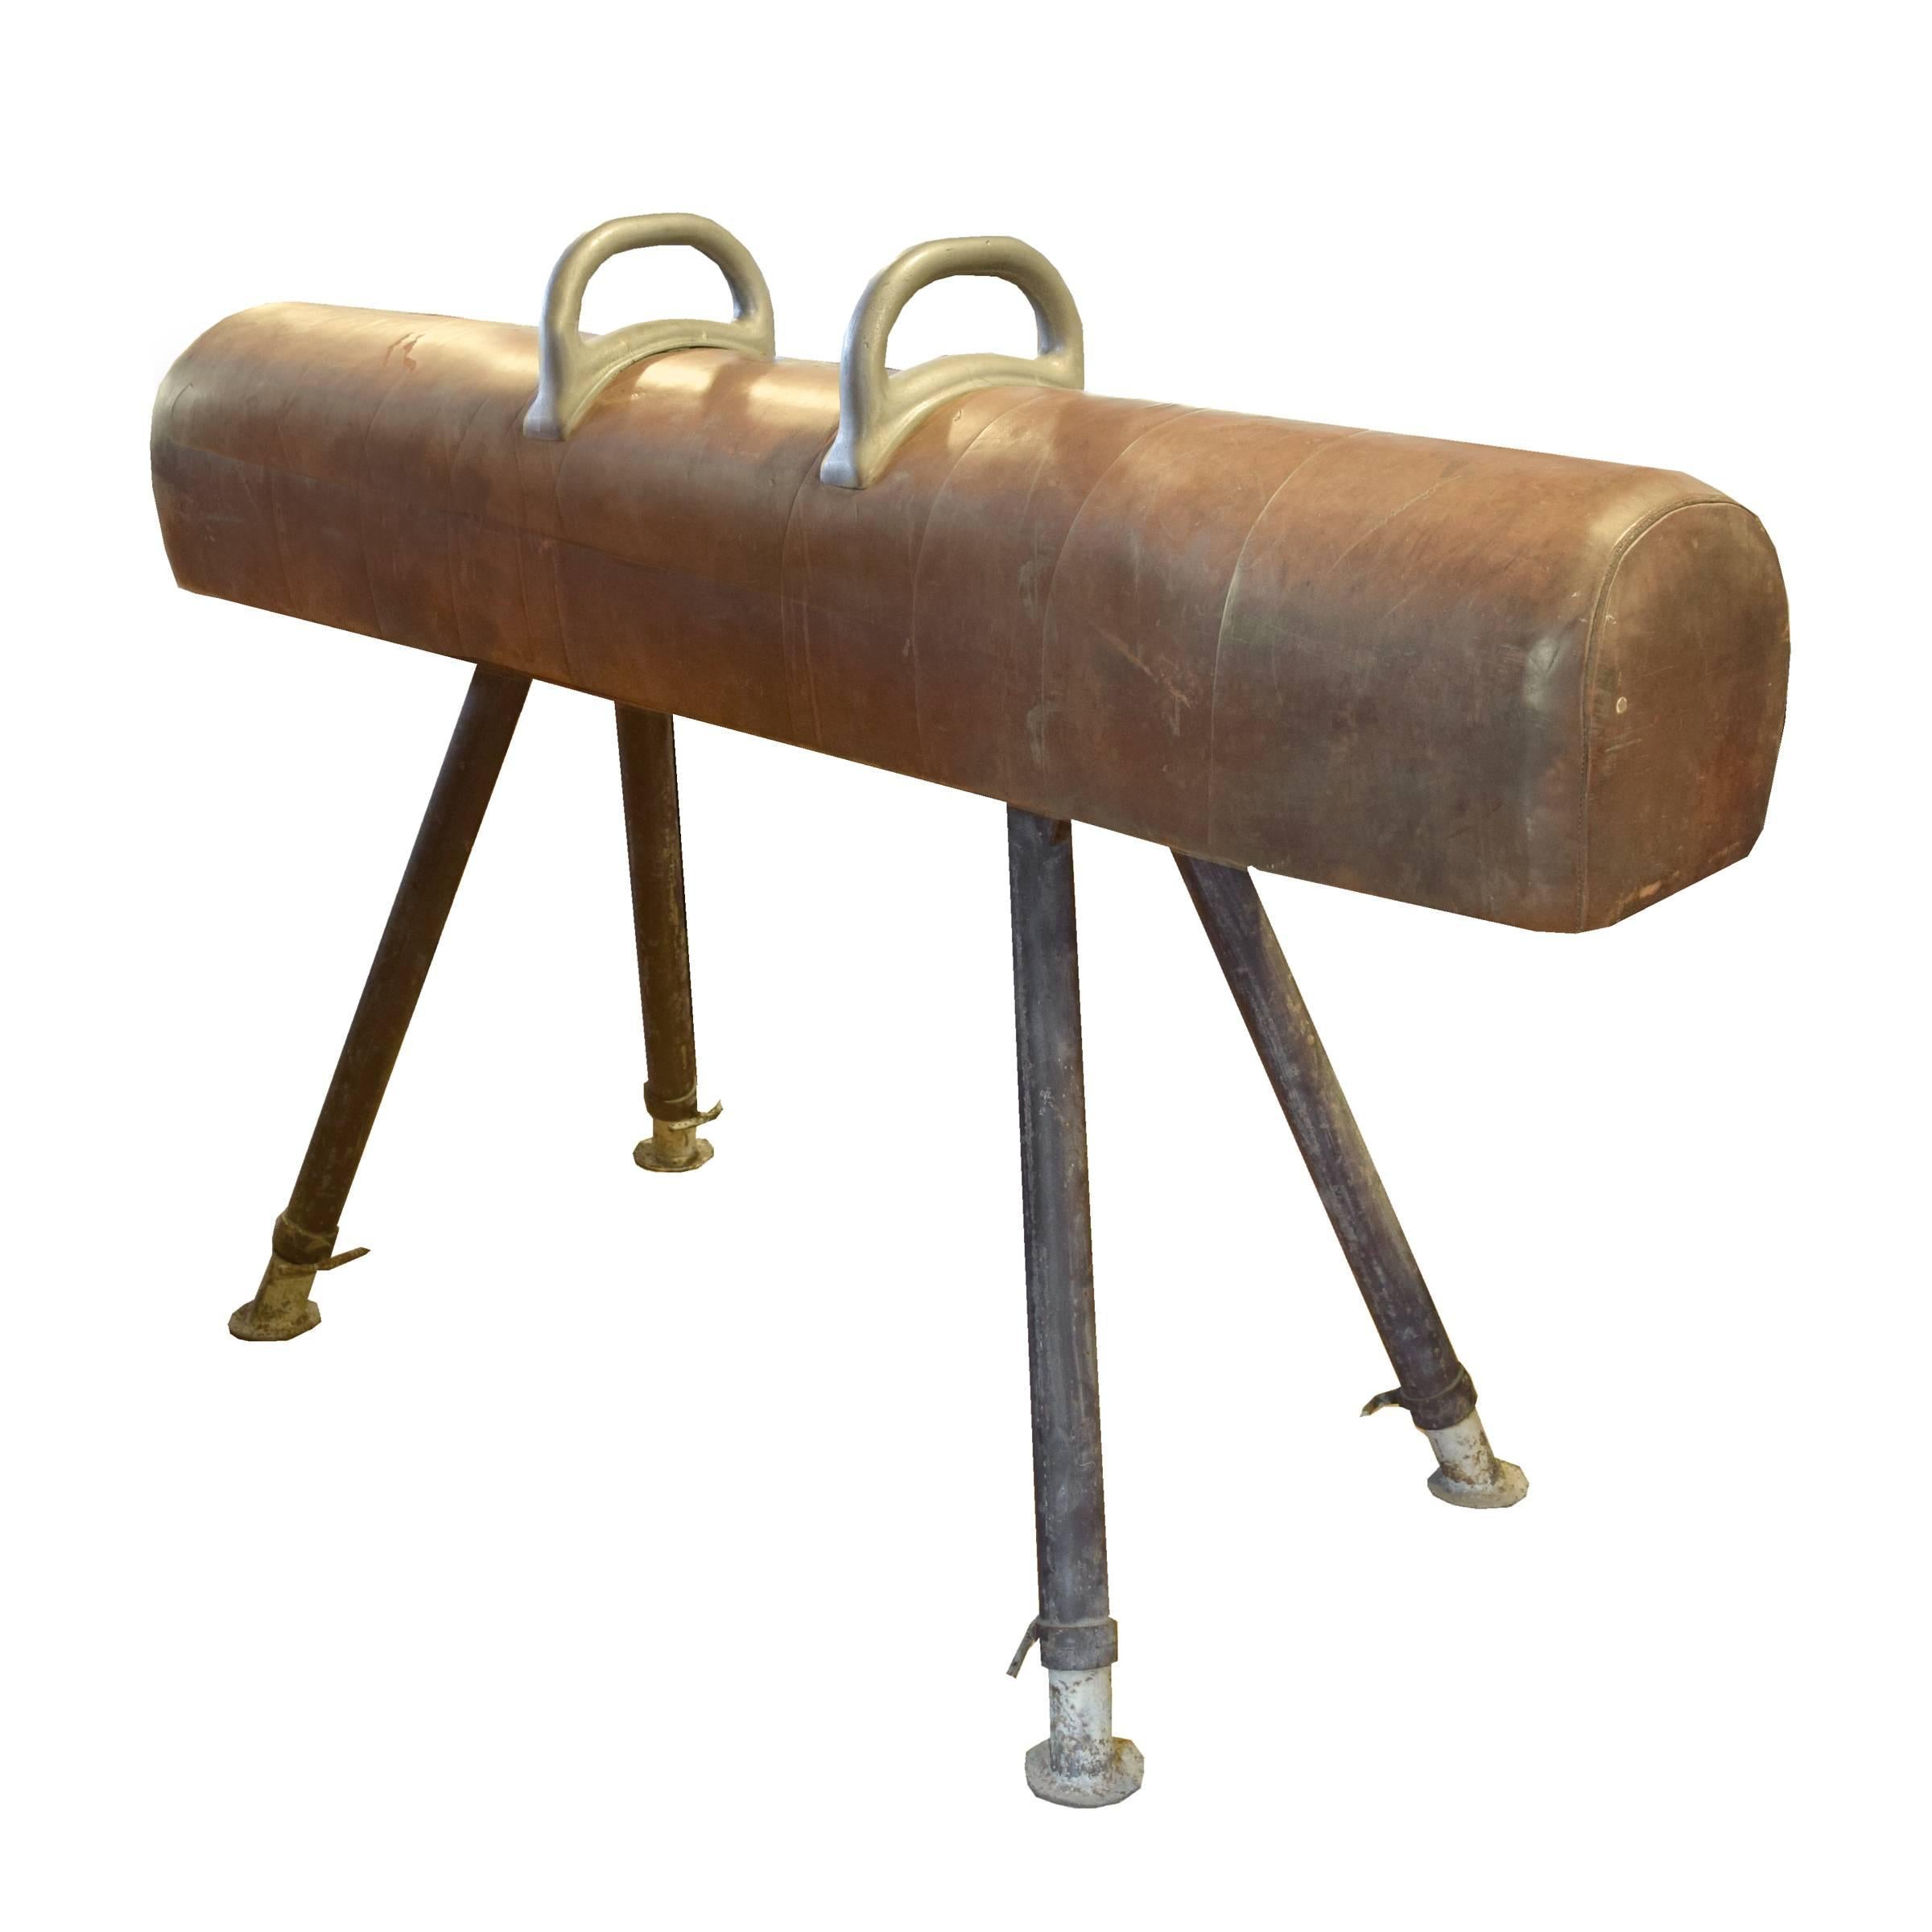 A sporty early 20th century leather, wood and iron pommel horse with adjustable legs and two handles, from a gymnasium in the Czech Republic.